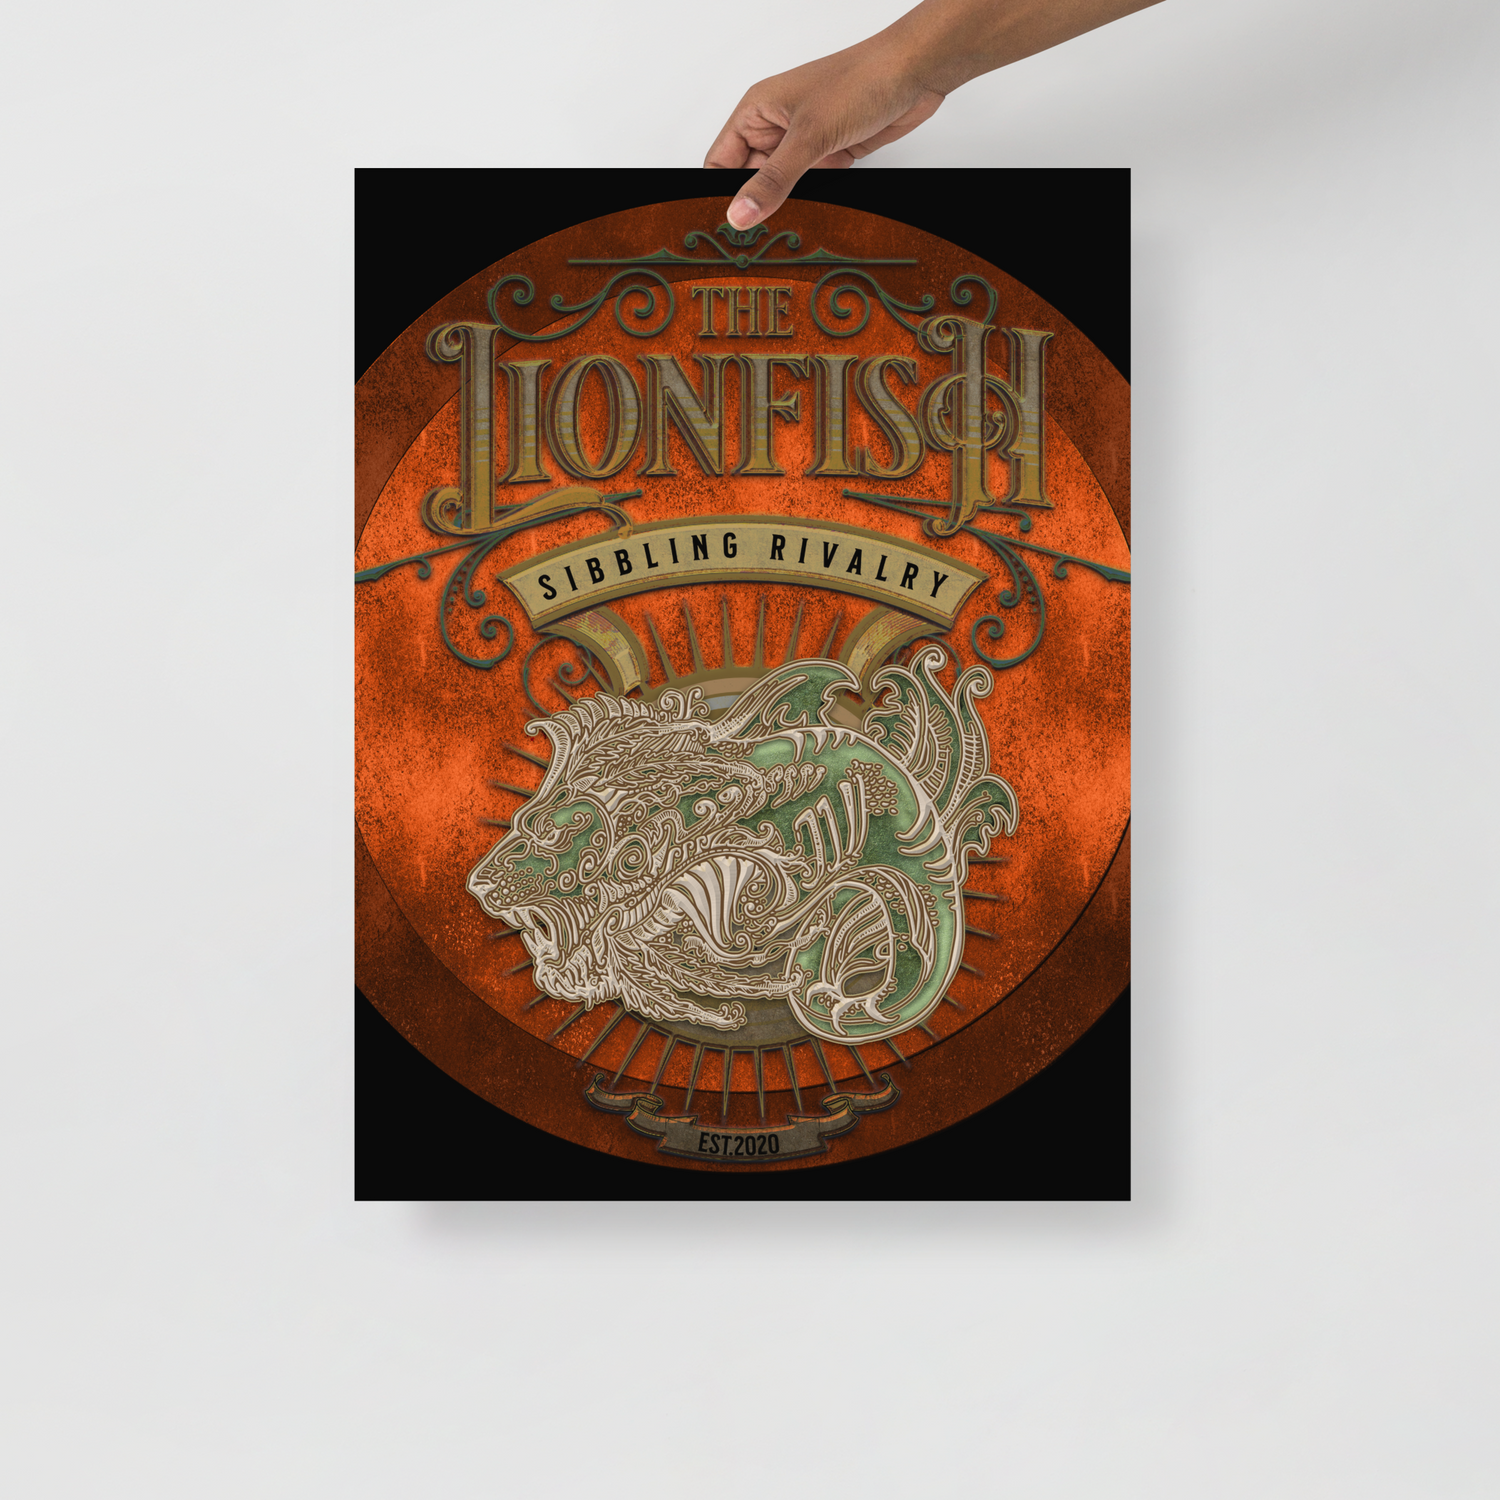 LIONFISH PUB-STYLE POSTER ~ Quality Photo-paper poster - SIB.BLING RIVALRY